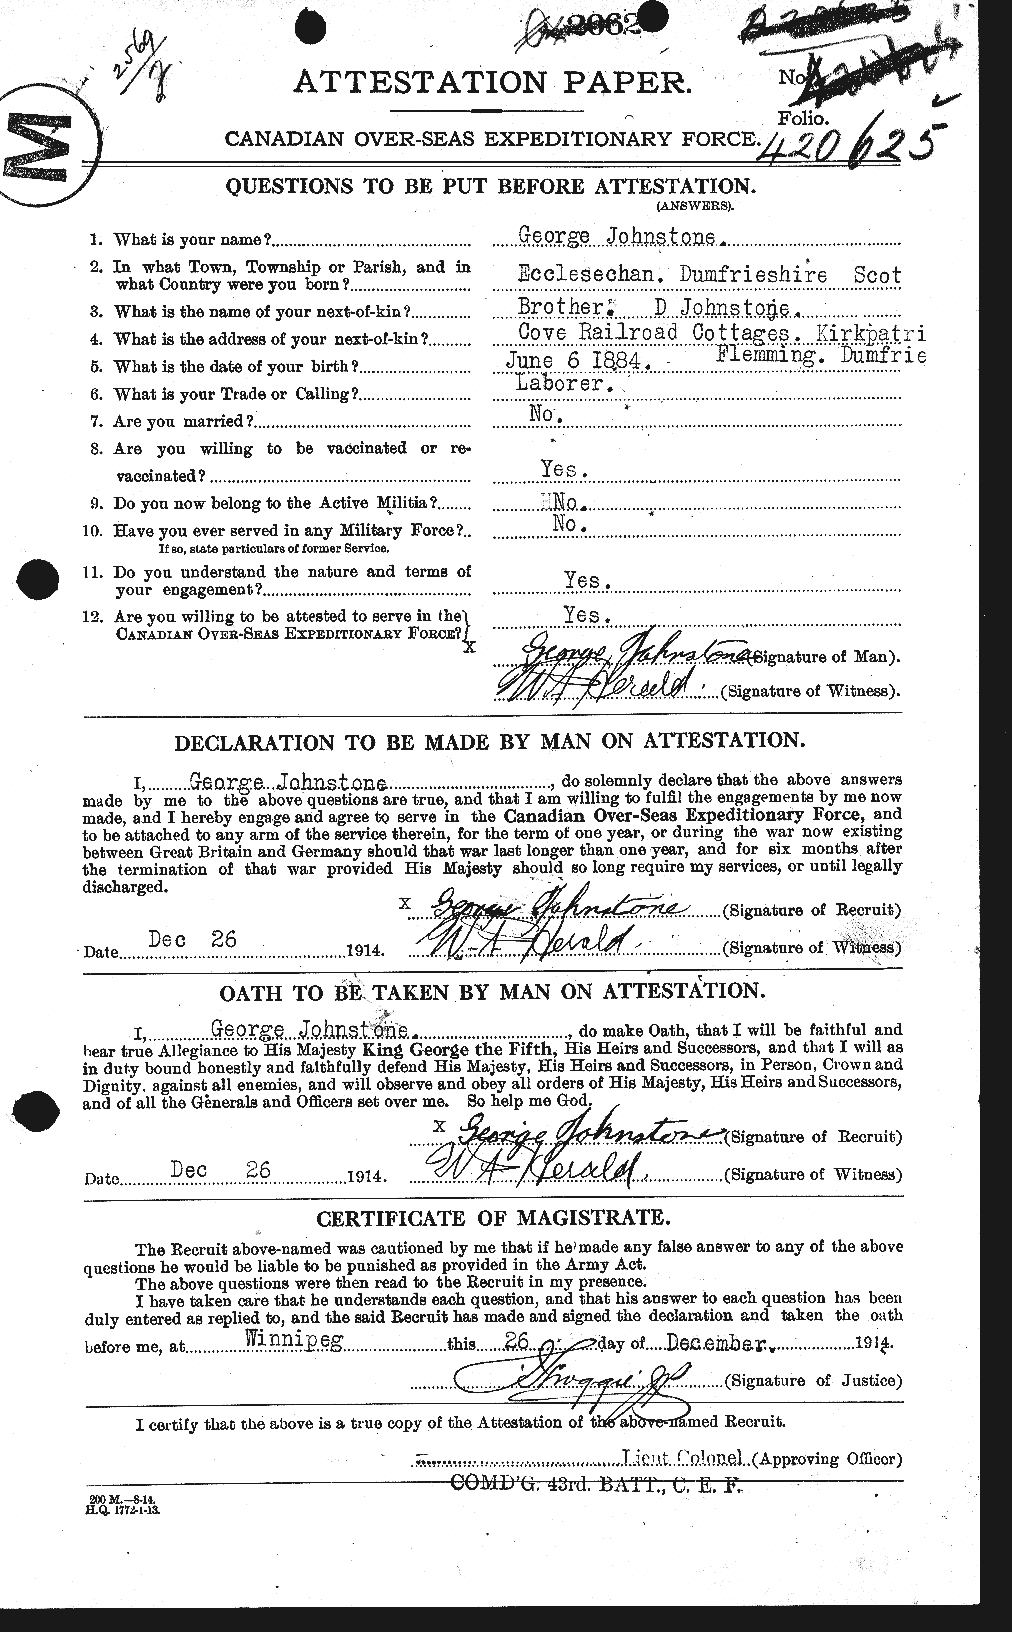 Personnel Records of the First World War - CEF 419619a